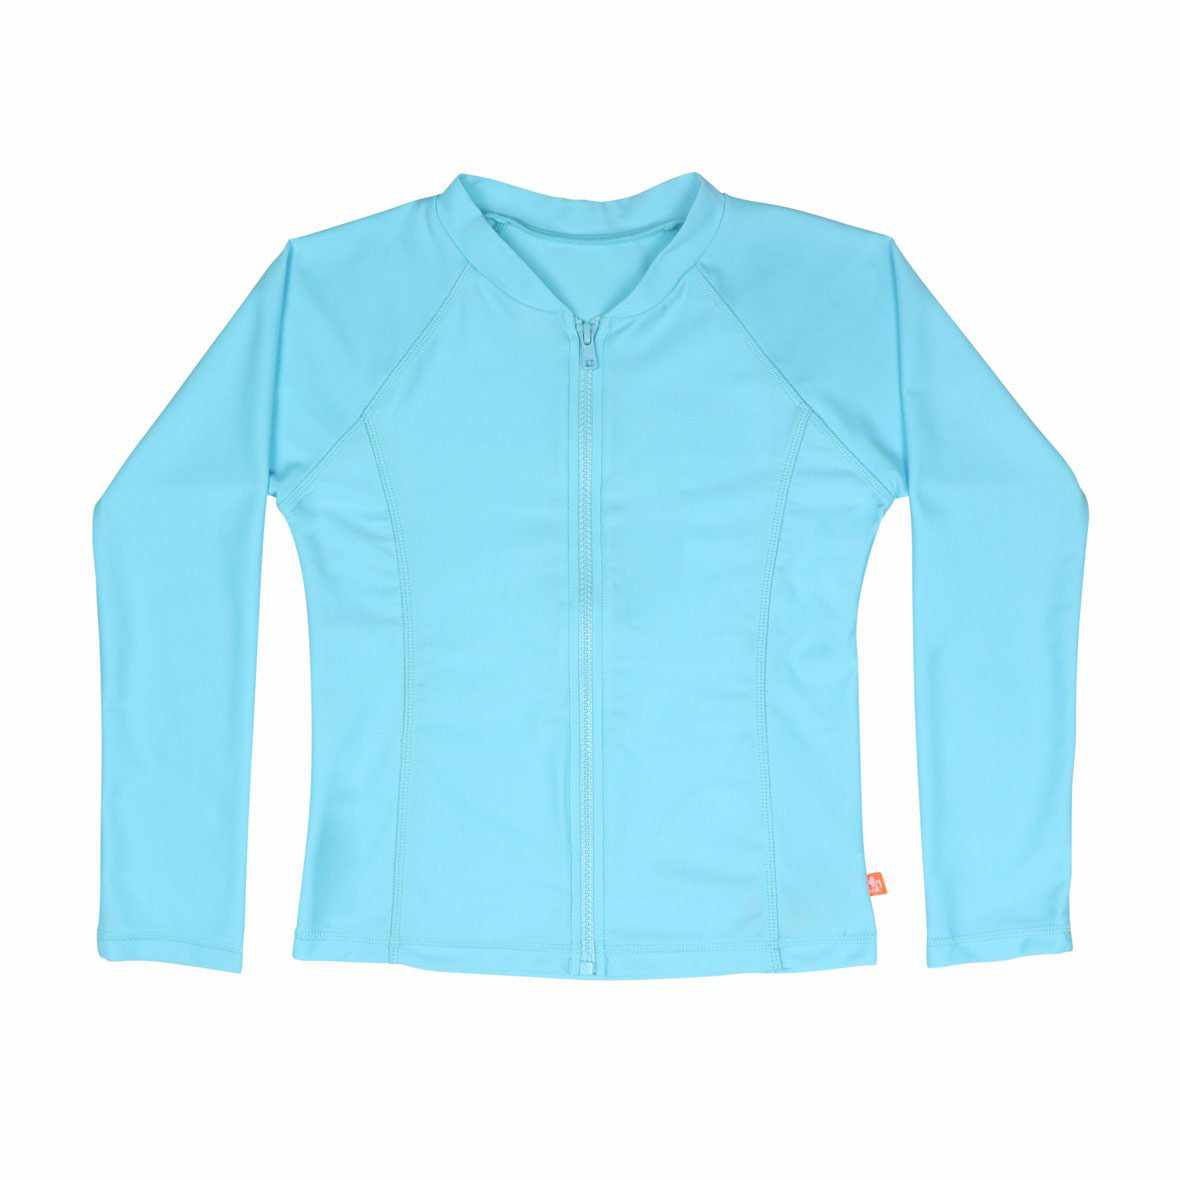 Salty Ink Girls Long Sleeve Sunvest - Ice Blue